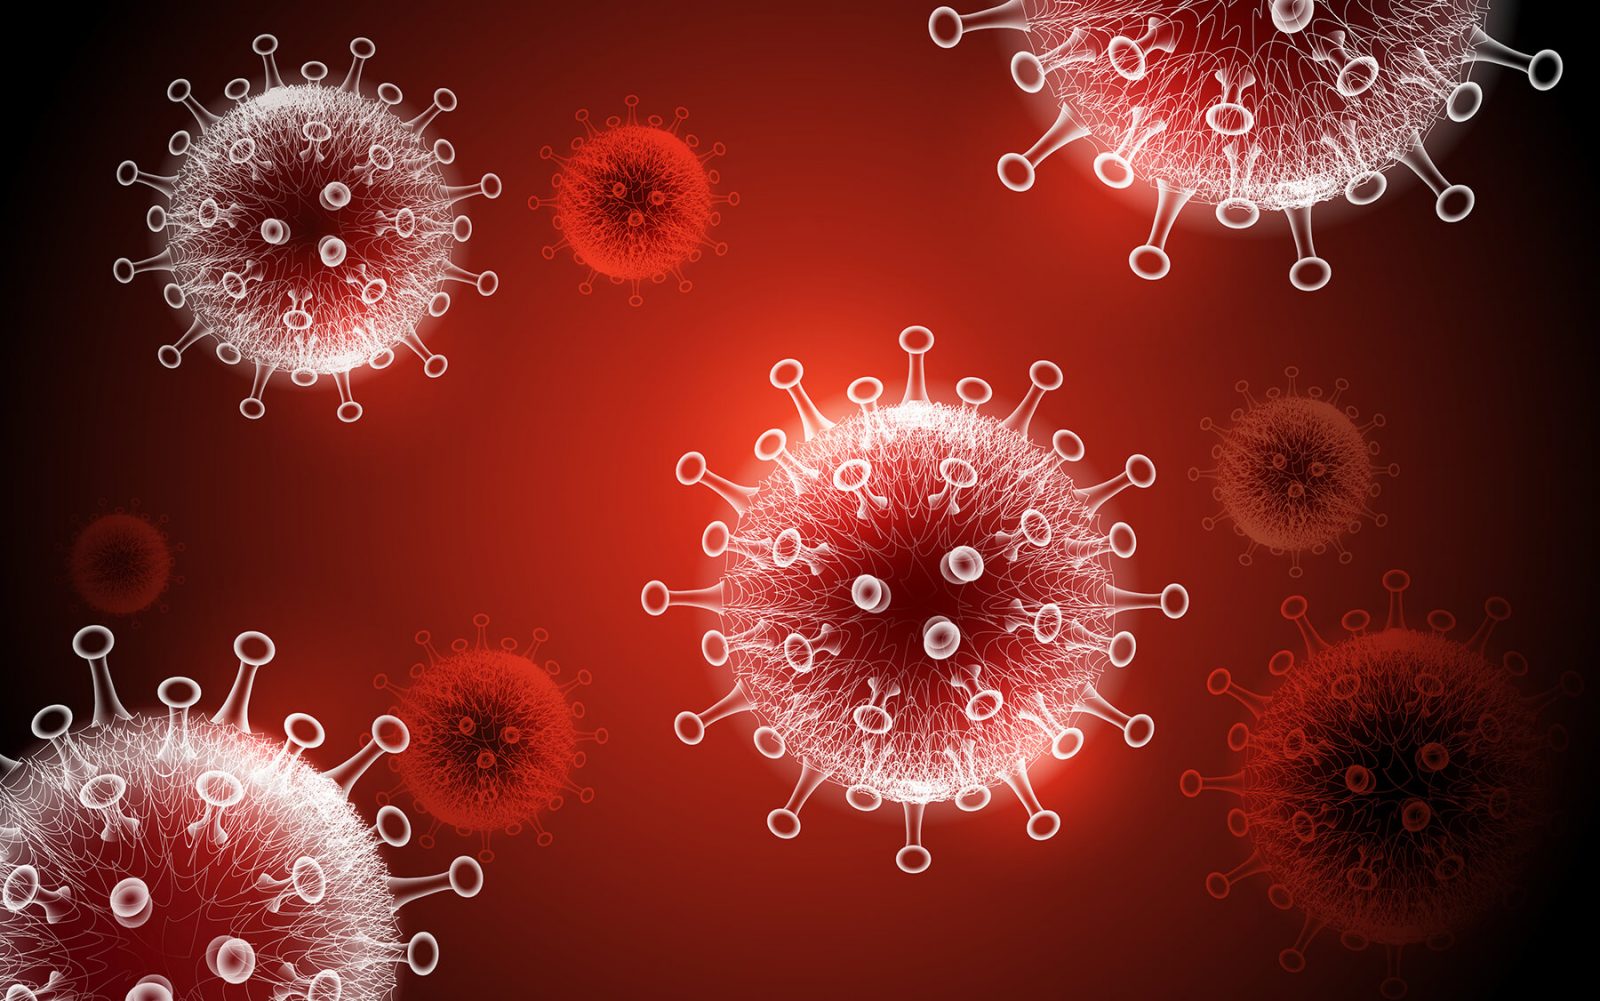 COVID-19 virus against red background